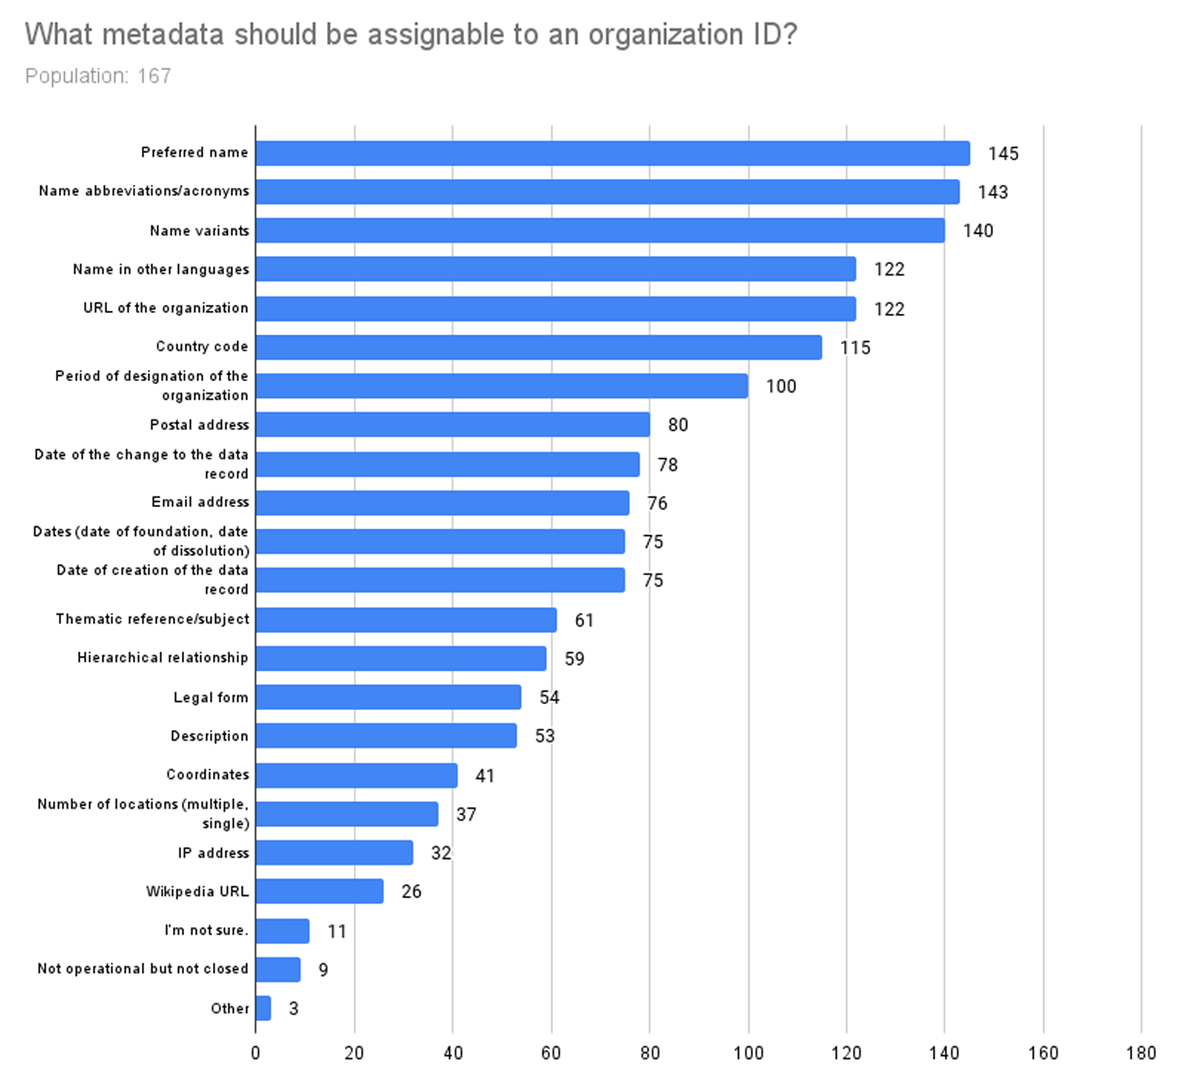 Distribution and number of responses to the question, ‘What metadata should be assignable to an organization ID?’